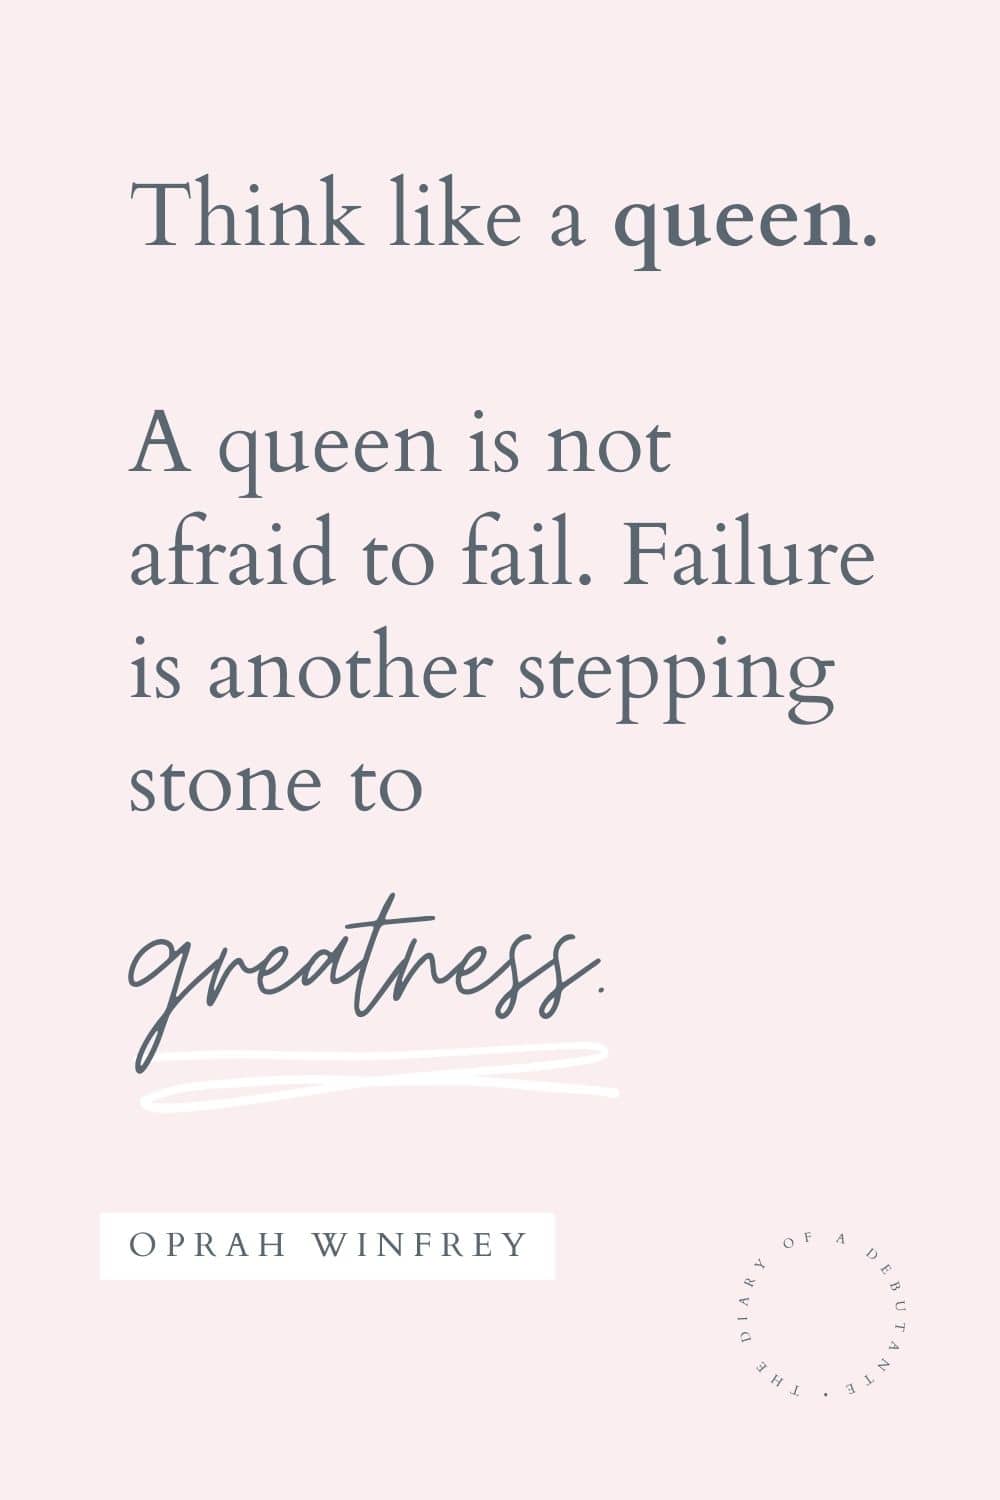 Oprah think like a queen quote curated as part of a collection of success quotes for women by blogger Stephanie Ziajka on Diary of a Debutante